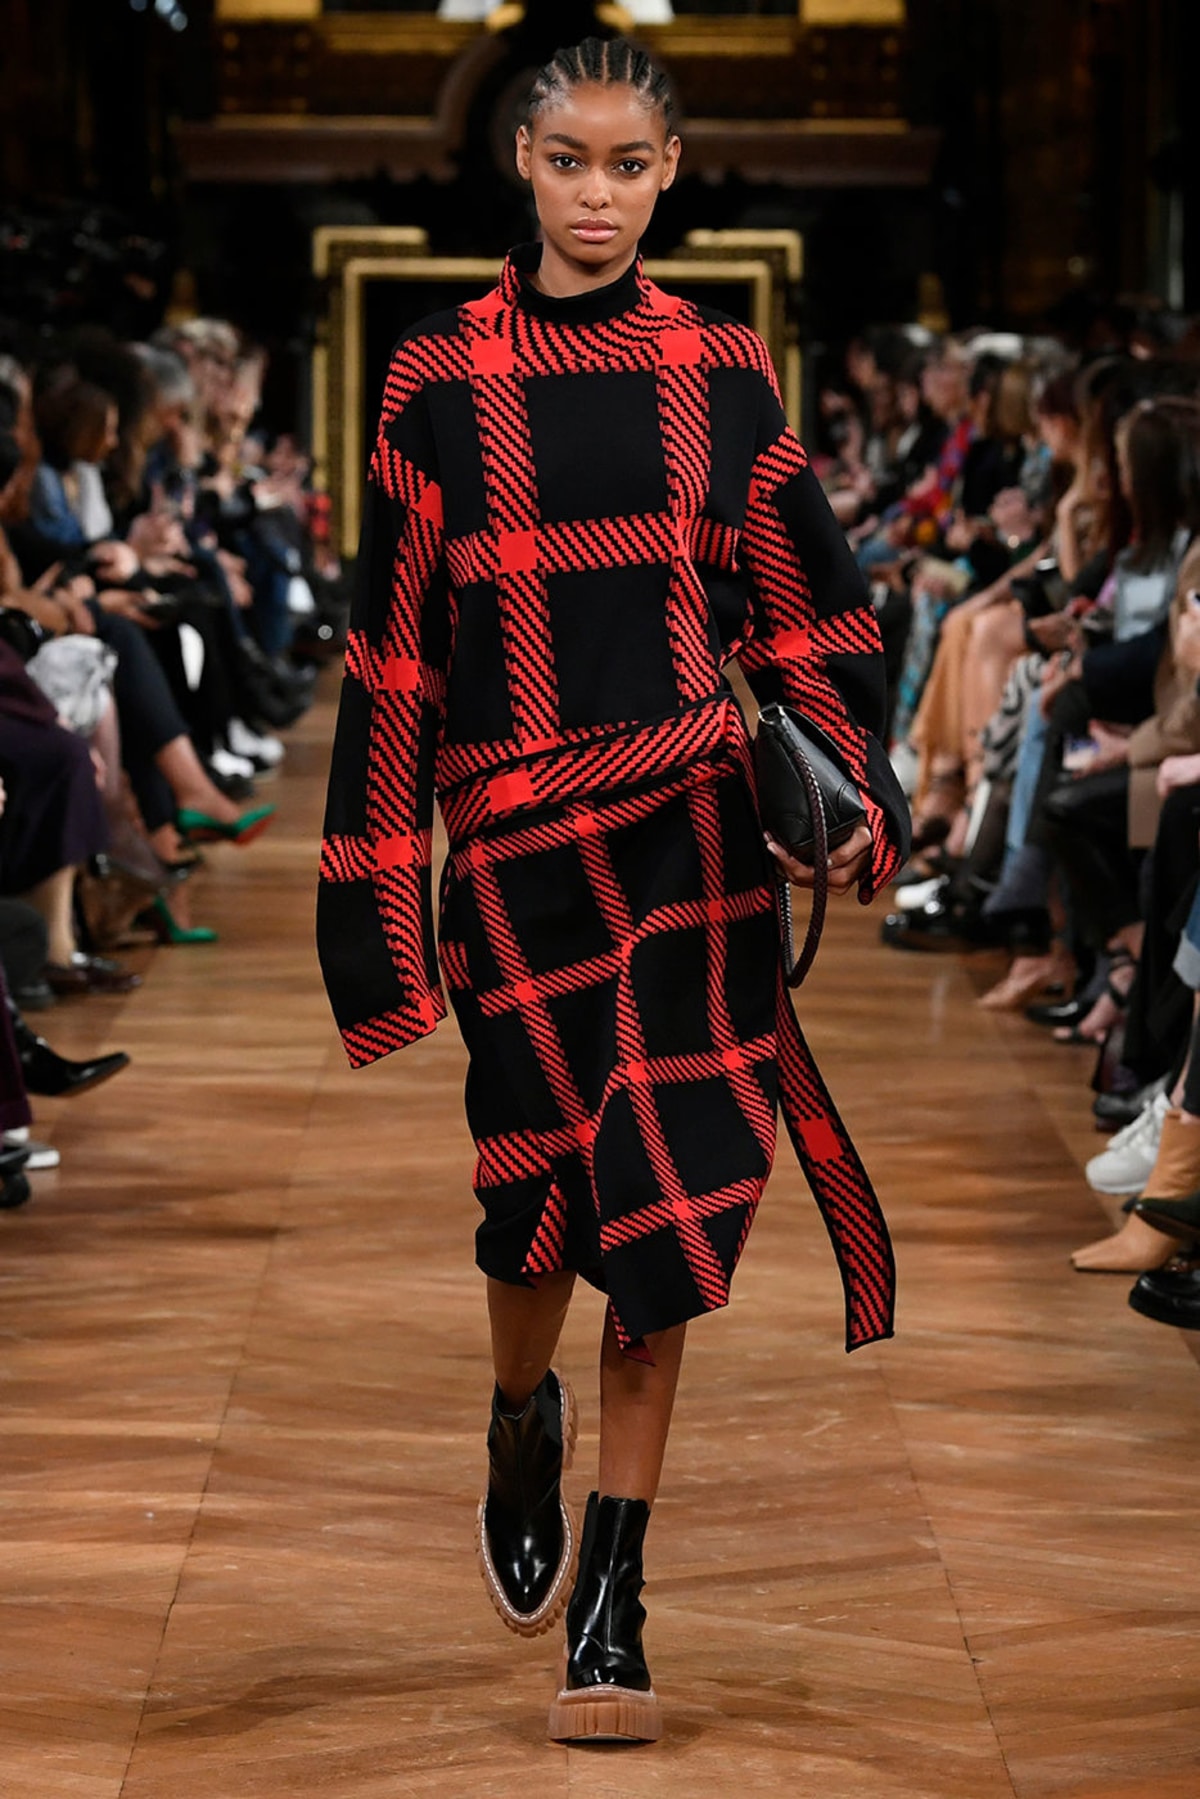 fashion trends, fashion news, sustainable fashion trends, sustainable trends, Sustainable marketing trends, sustainable fashion, fashion industry, marketing, collection, Autumn, Winter, 2020, 2021, Autumn/Winter 2020-2021, sustainability, creative direction, social media, marketing trends, top marketing trends of 2020, Gucci, Stella McCartney, Nanushka, Vivienne Westwood, Stella Jean, Mother of Pearl, sustainable storytelling, visual communication, millennials, gen z, diversity, inclusive, inclusivity